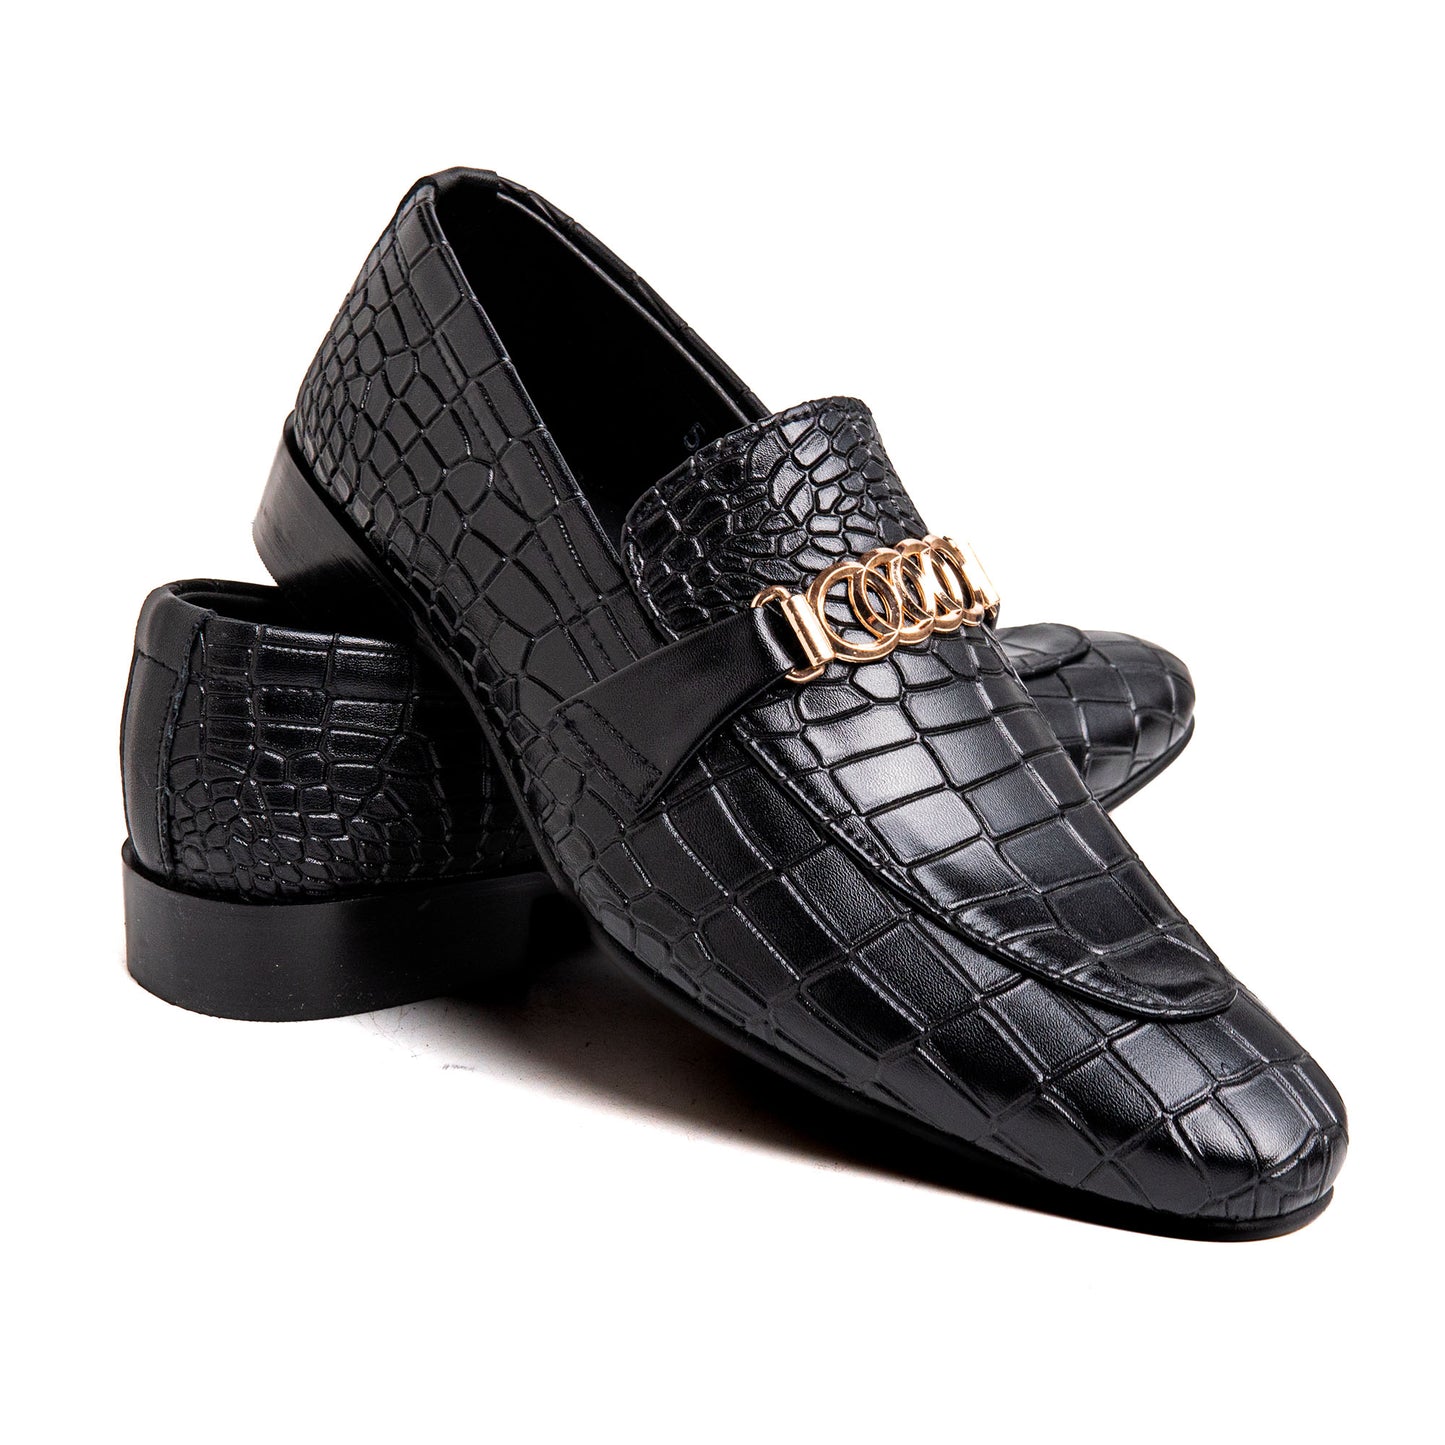 Men Black Engraved Imported PU Leather Shoes